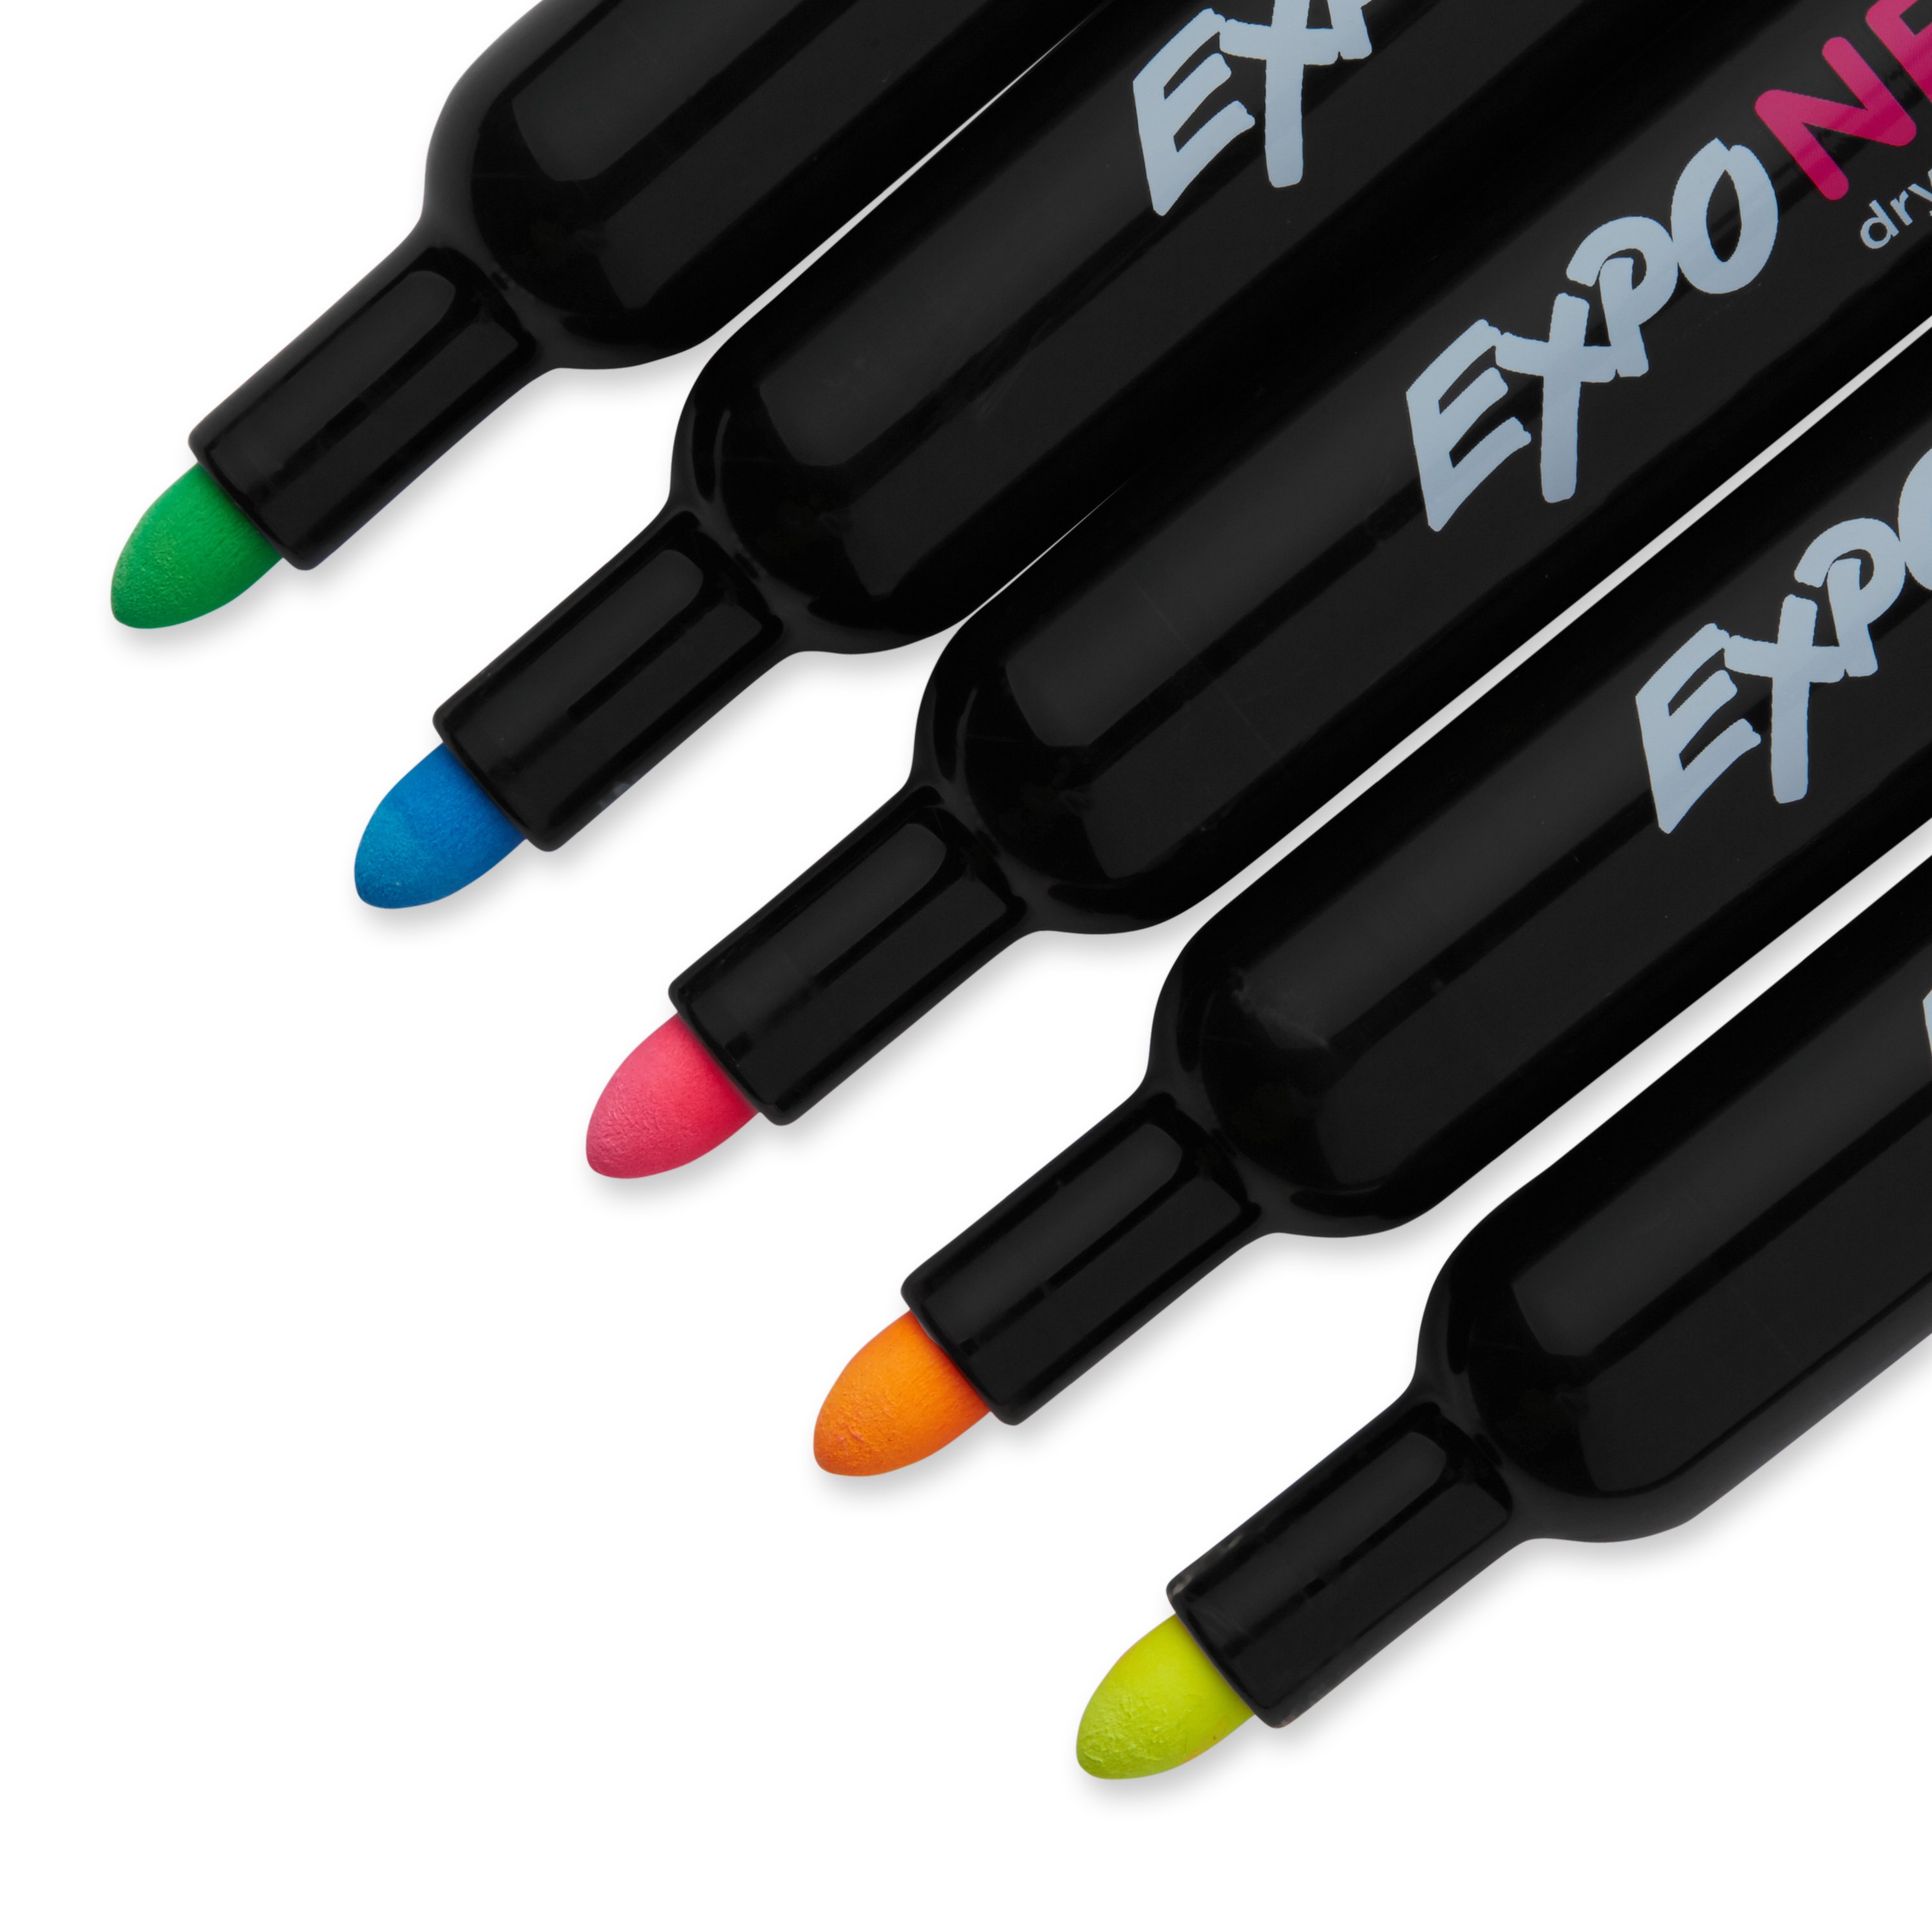 Glass Board Bullet Tip Neon Markers by ACCO Brands Corporation QRT79559Q